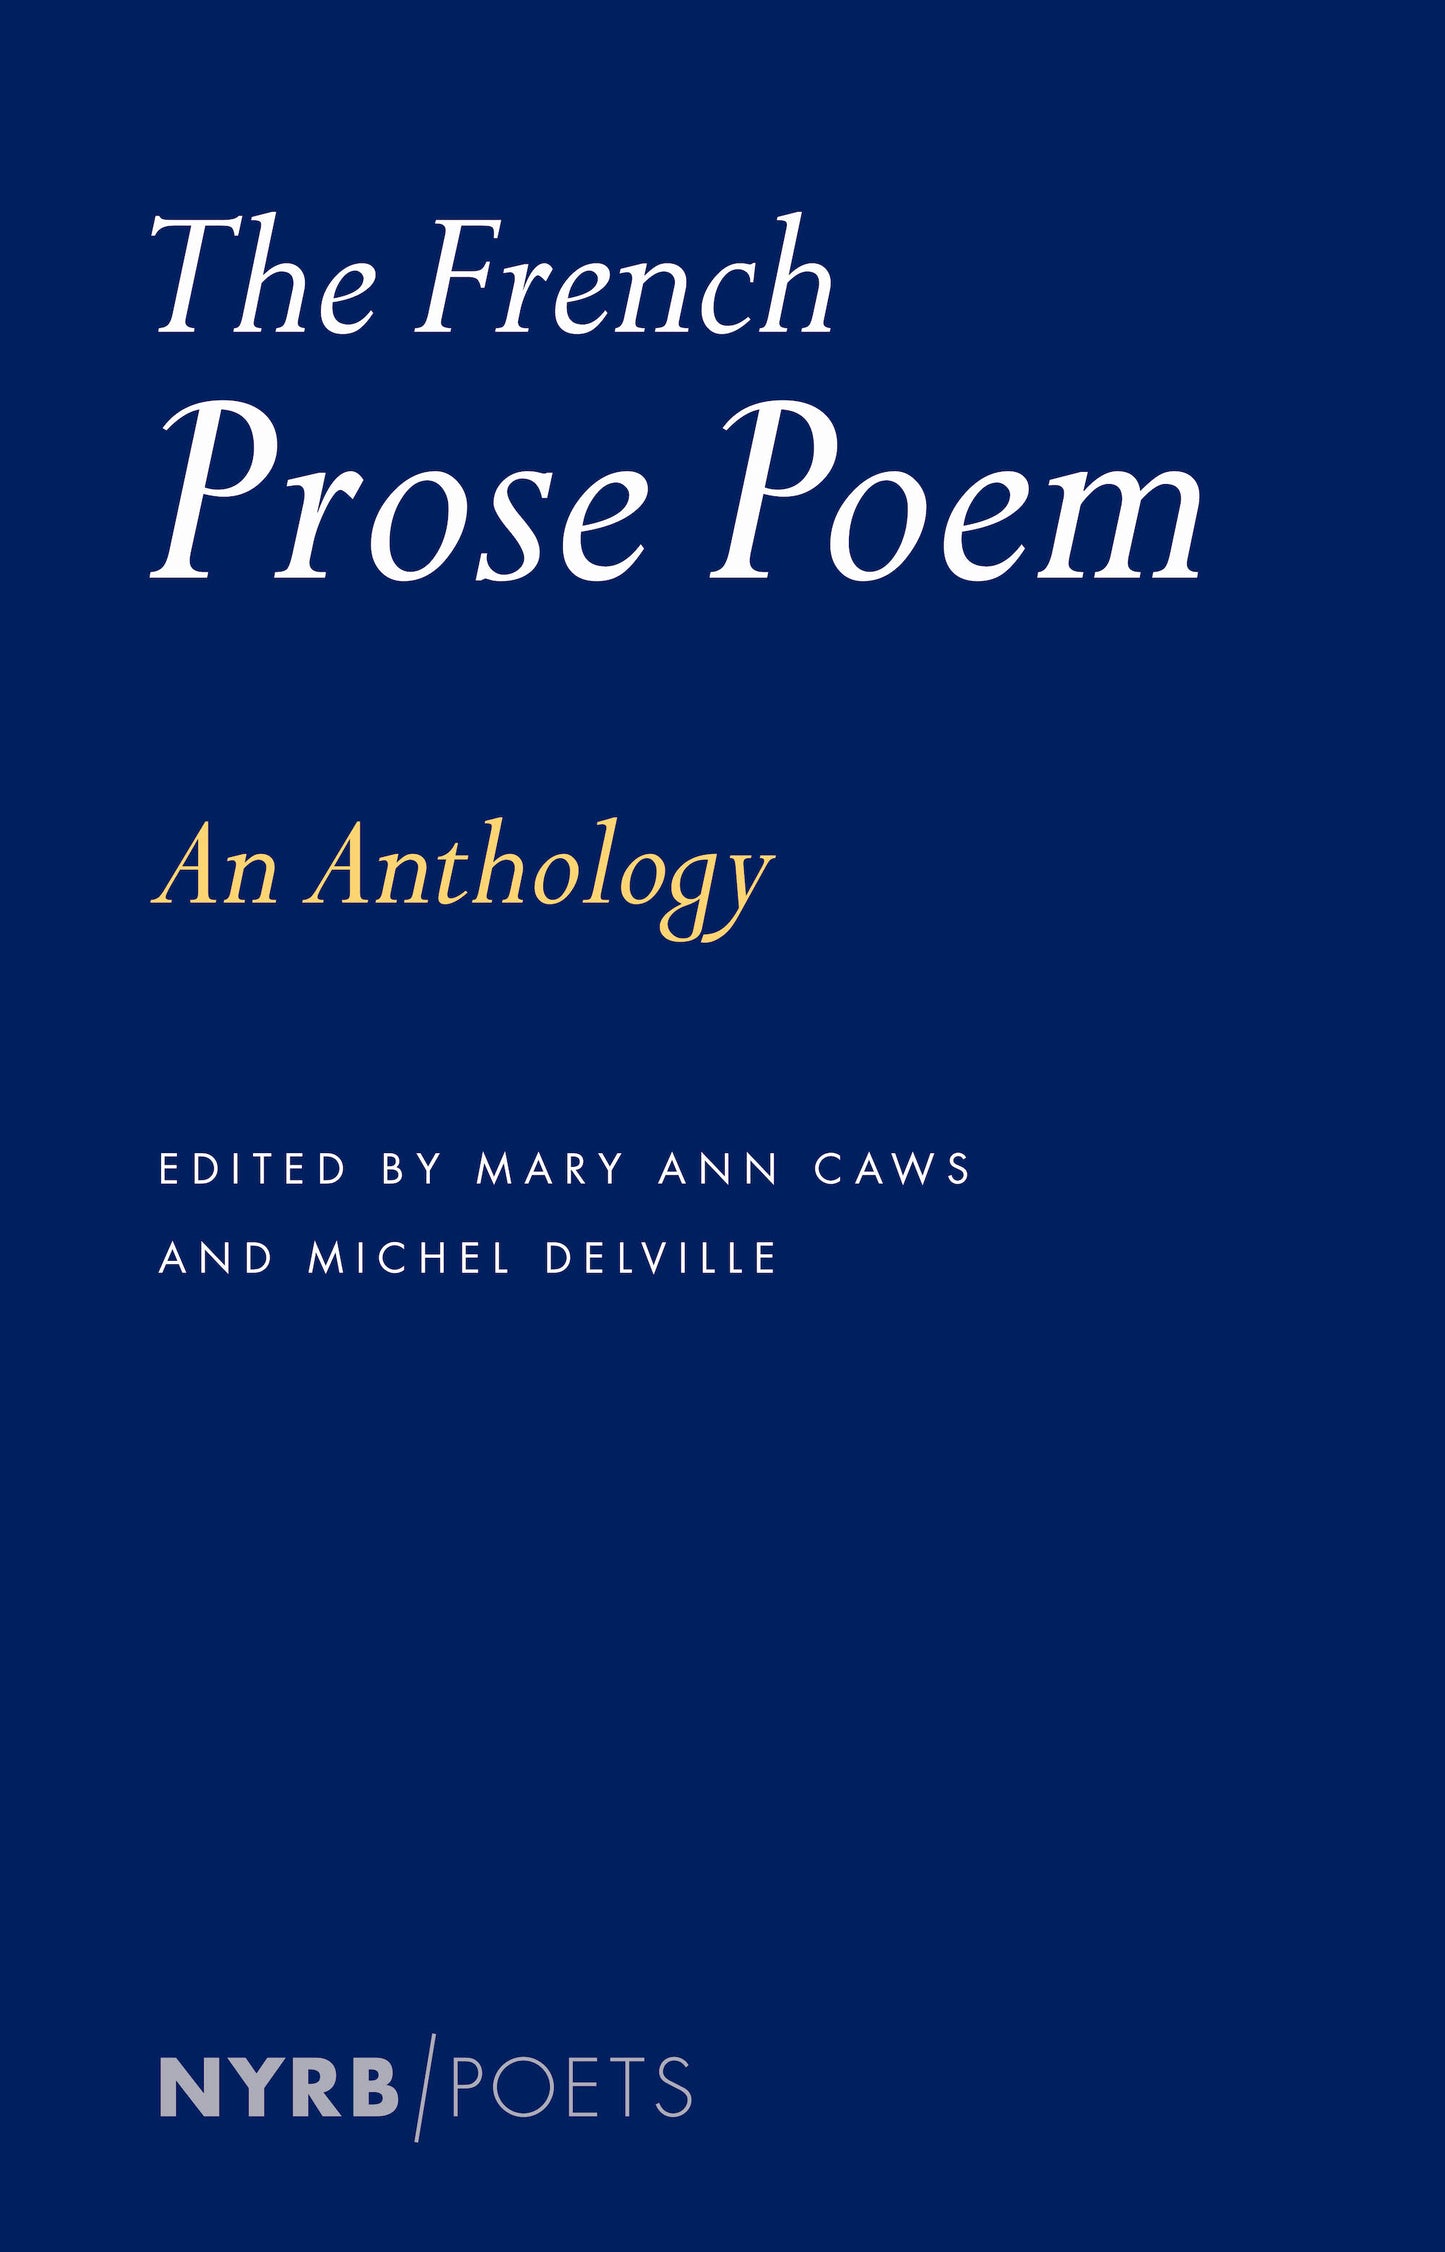 The French Prose Poem